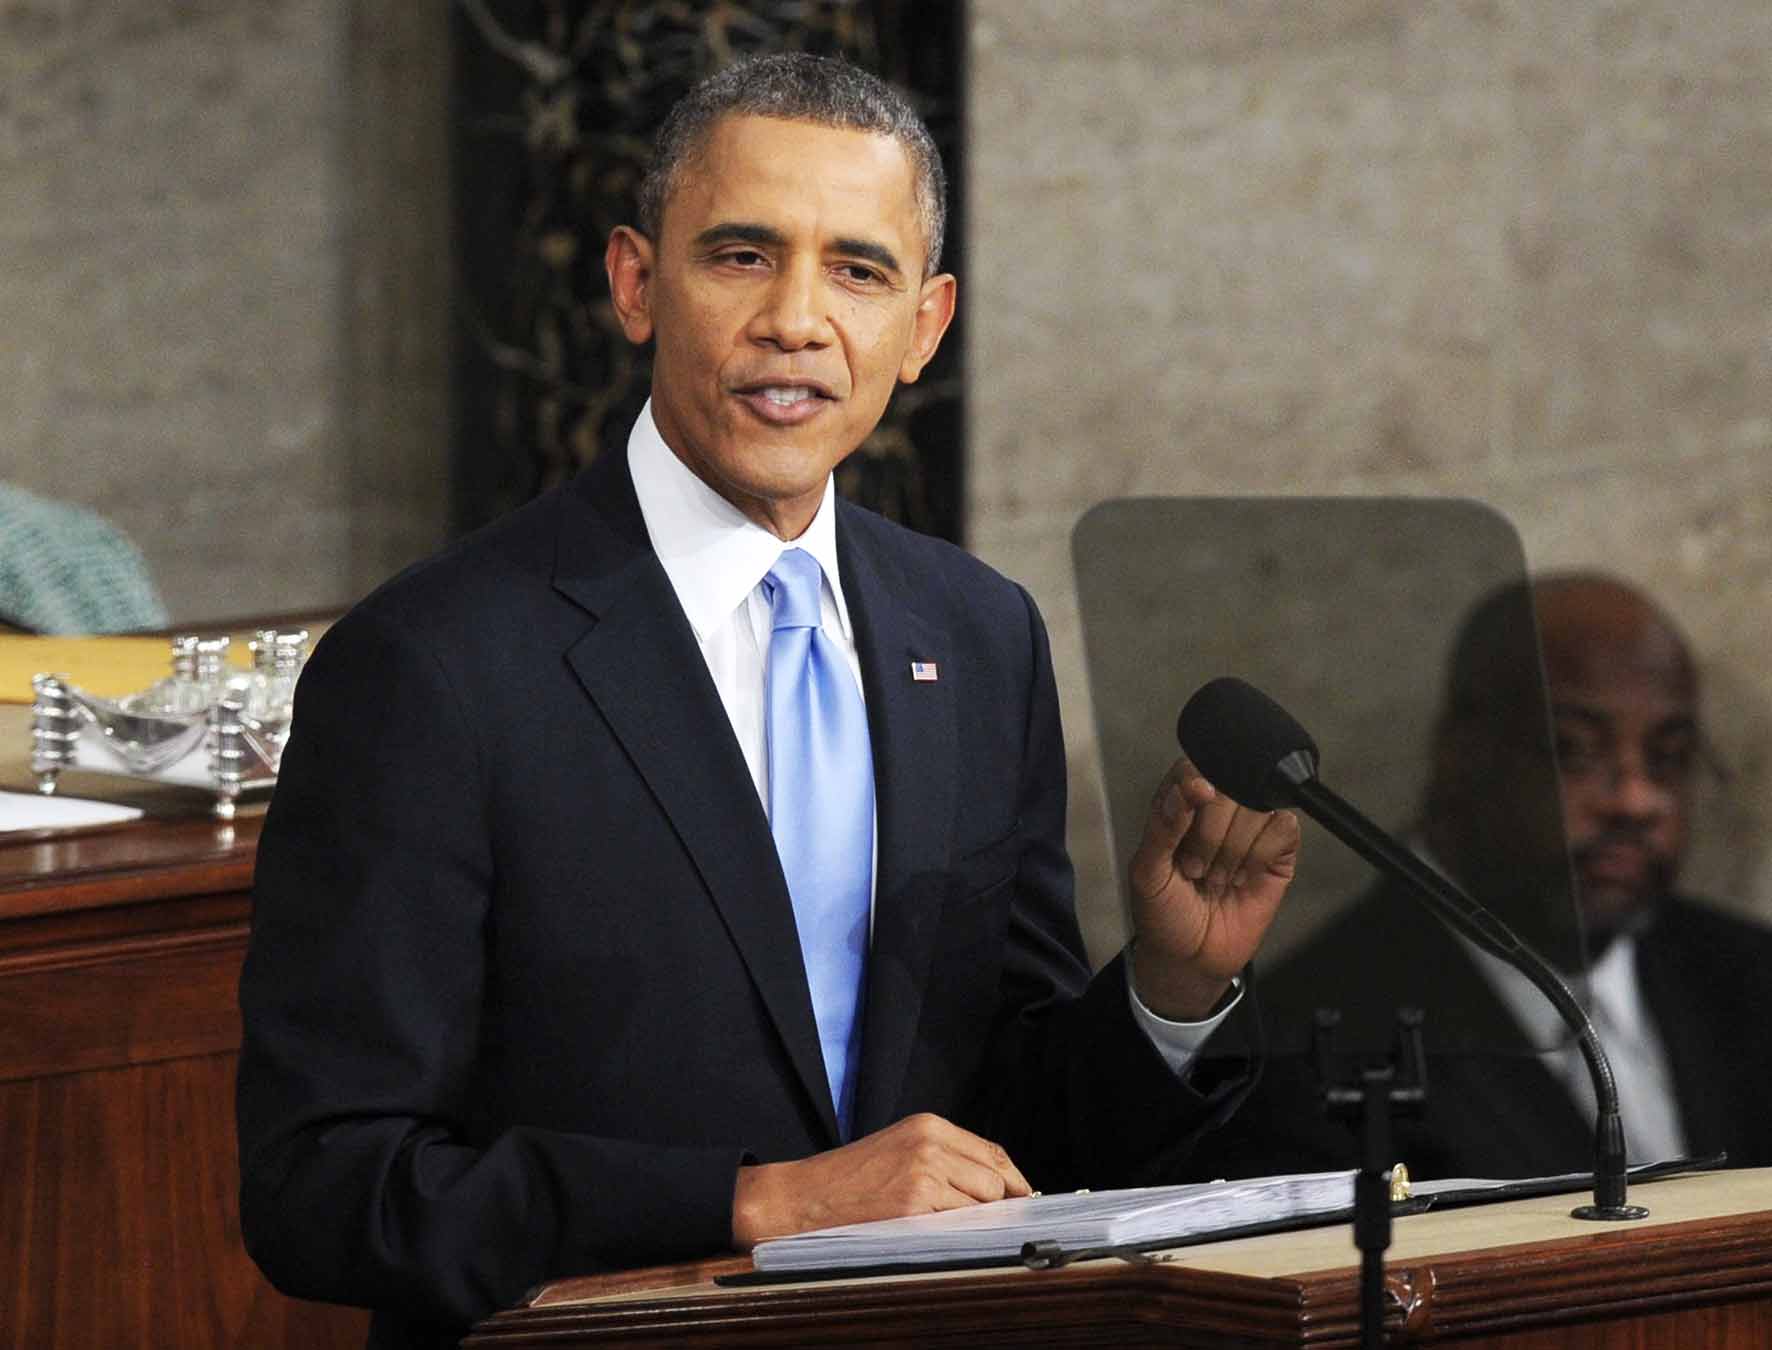 A Closer Look at President Obama's State of the Union Speech